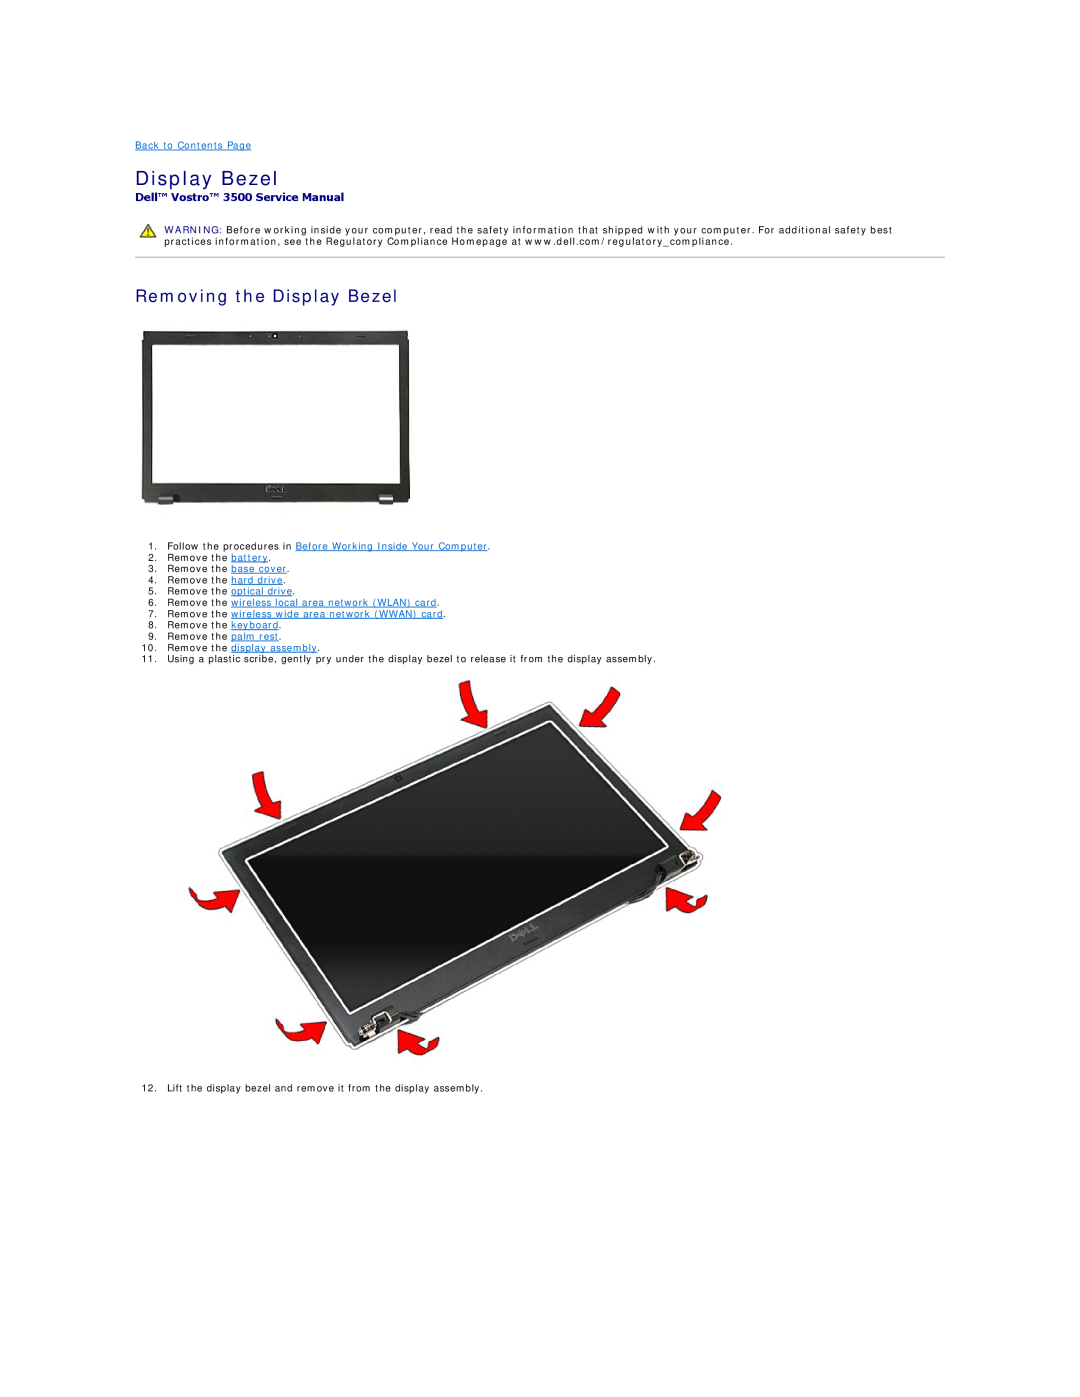 Dell specifications Removing the Display Bezel, Dell Vostro 3500 Service Manual 